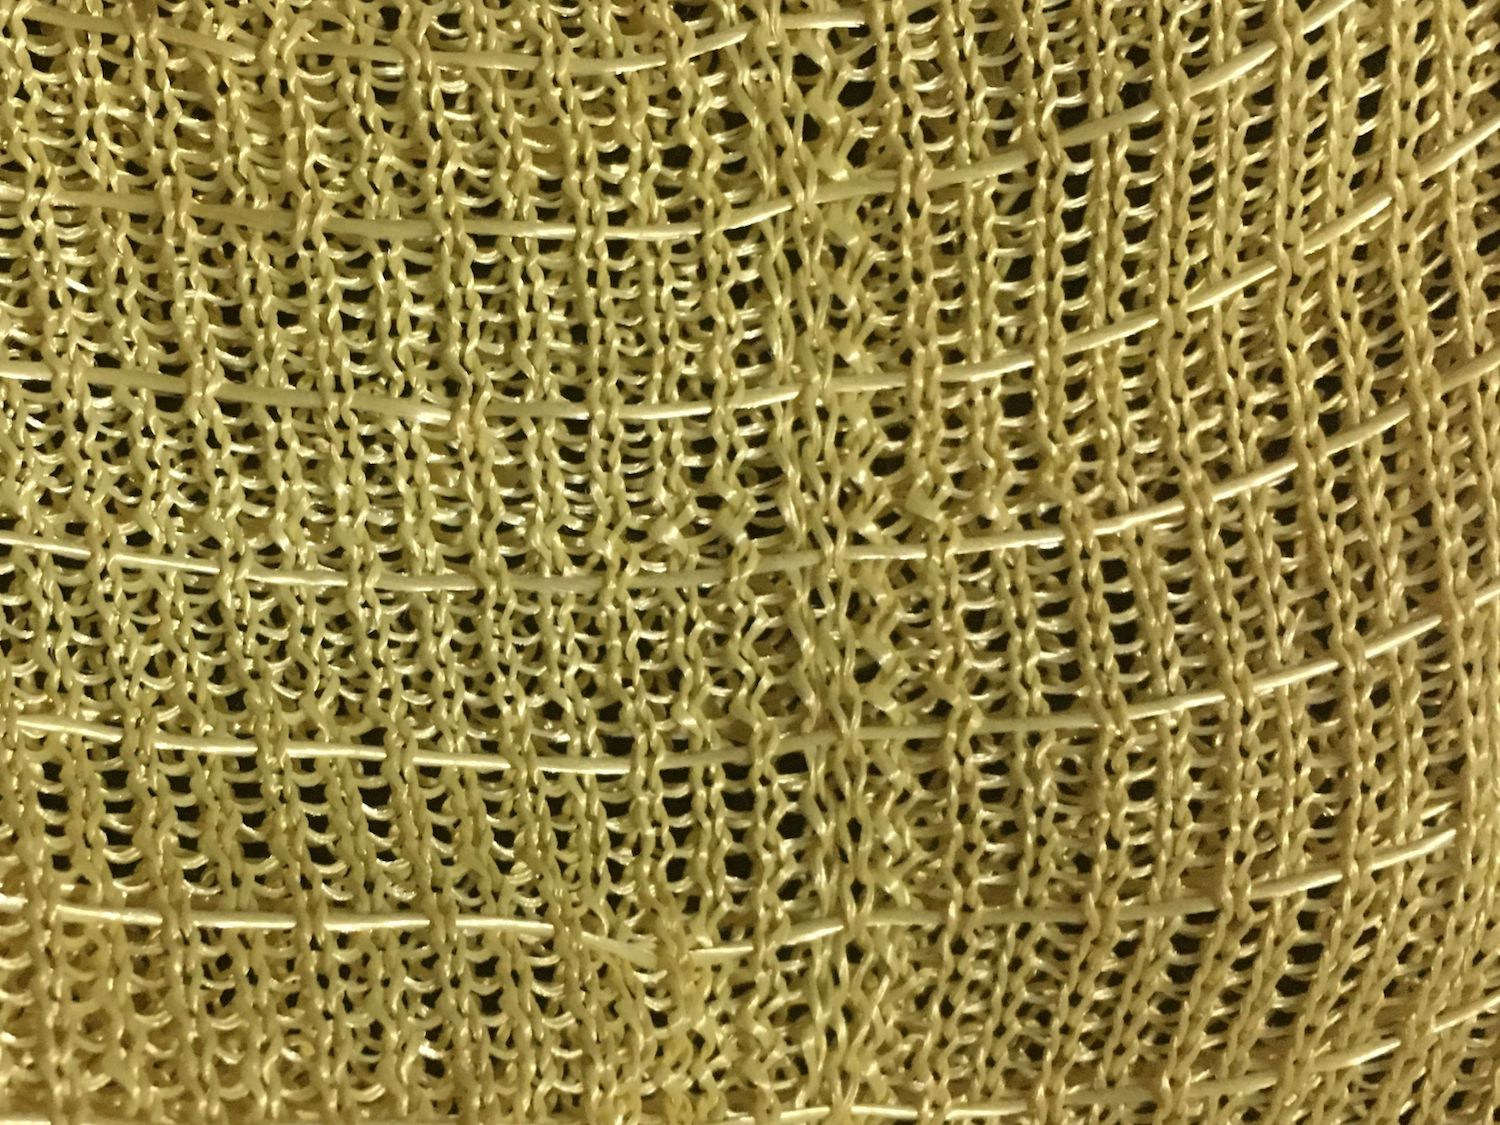 Kevlar reinforced weft knitted fabric preform ready for a moulding process. © Fabdesigns